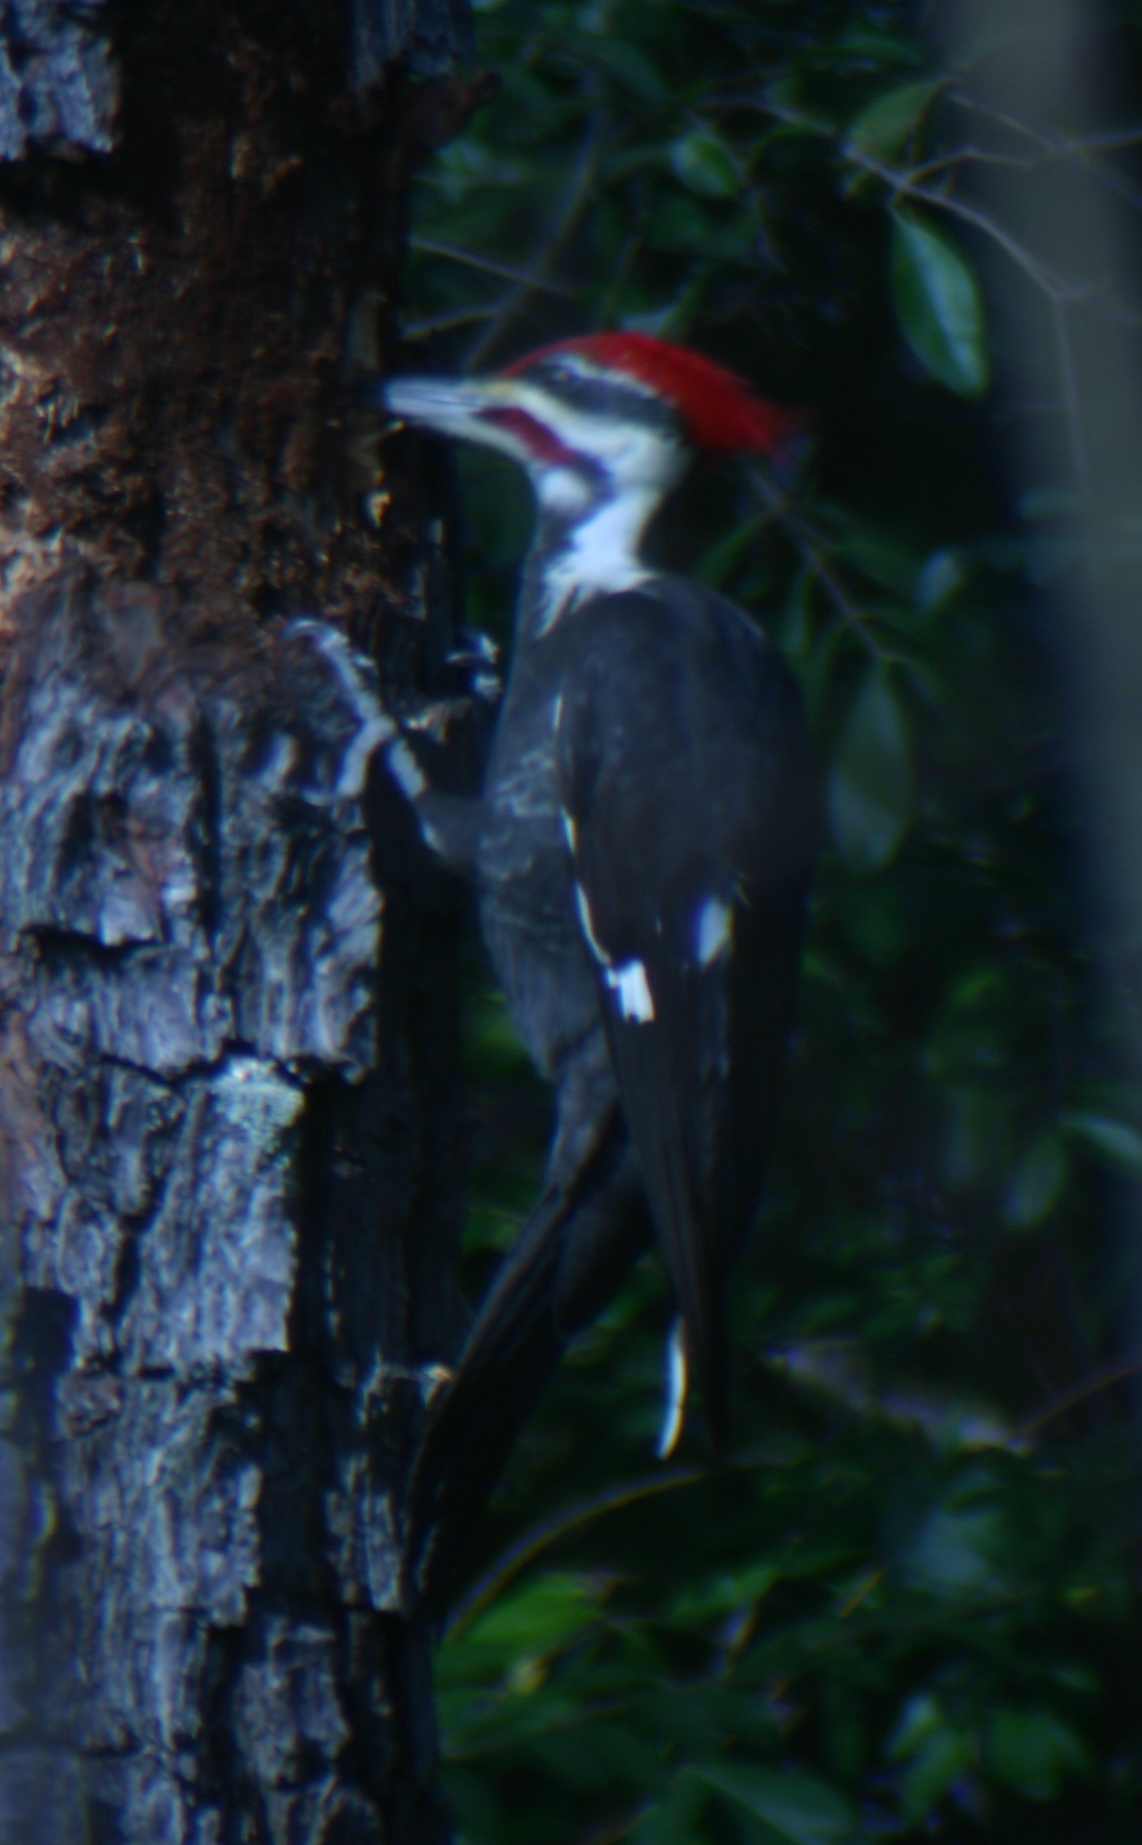 Pileated Woodpecker digging in a dead pine